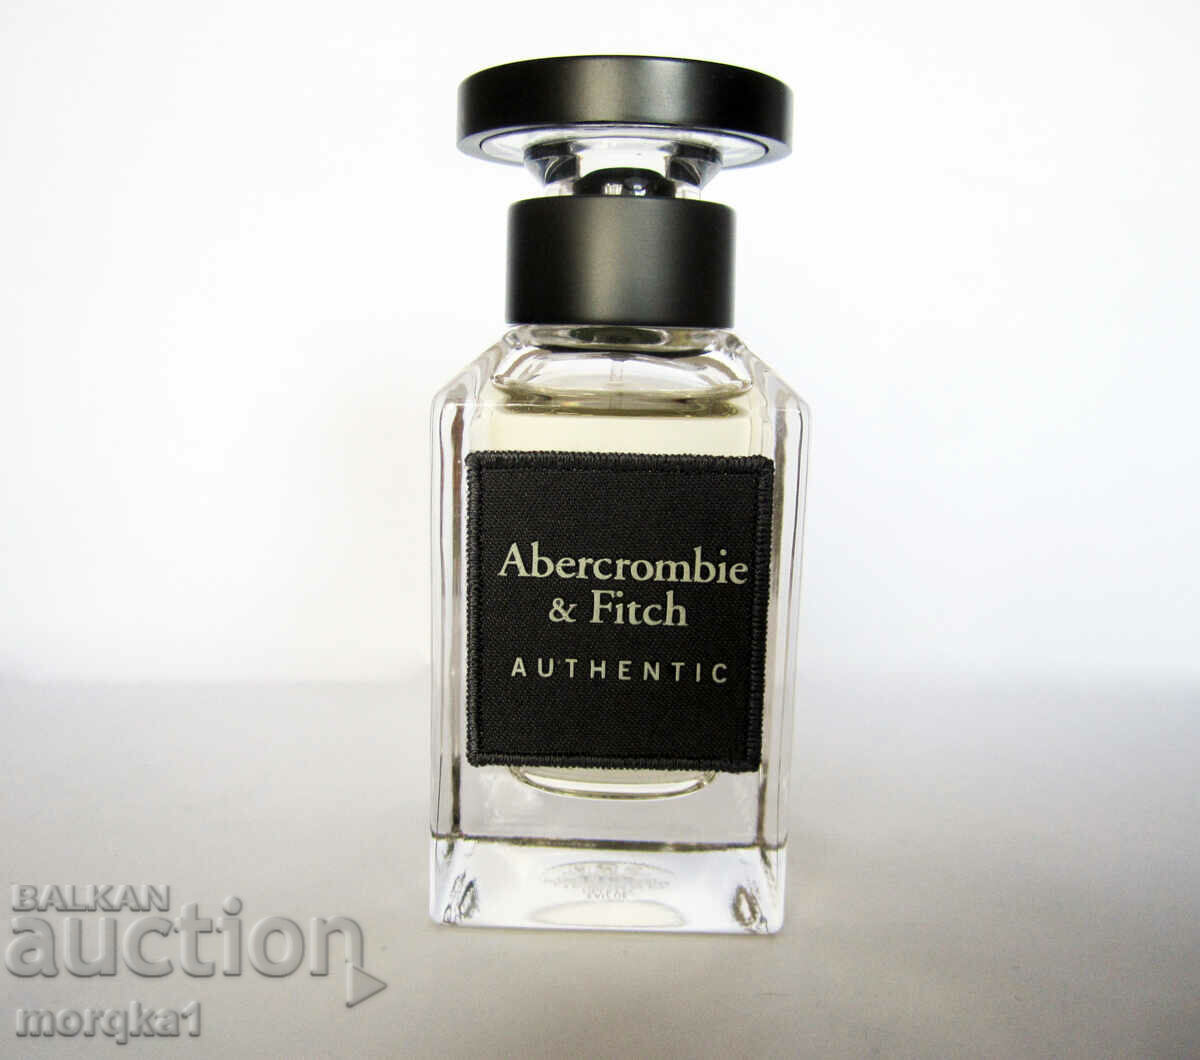 Casts, cast, men's perfume Abercrombie and Fitch Authentic